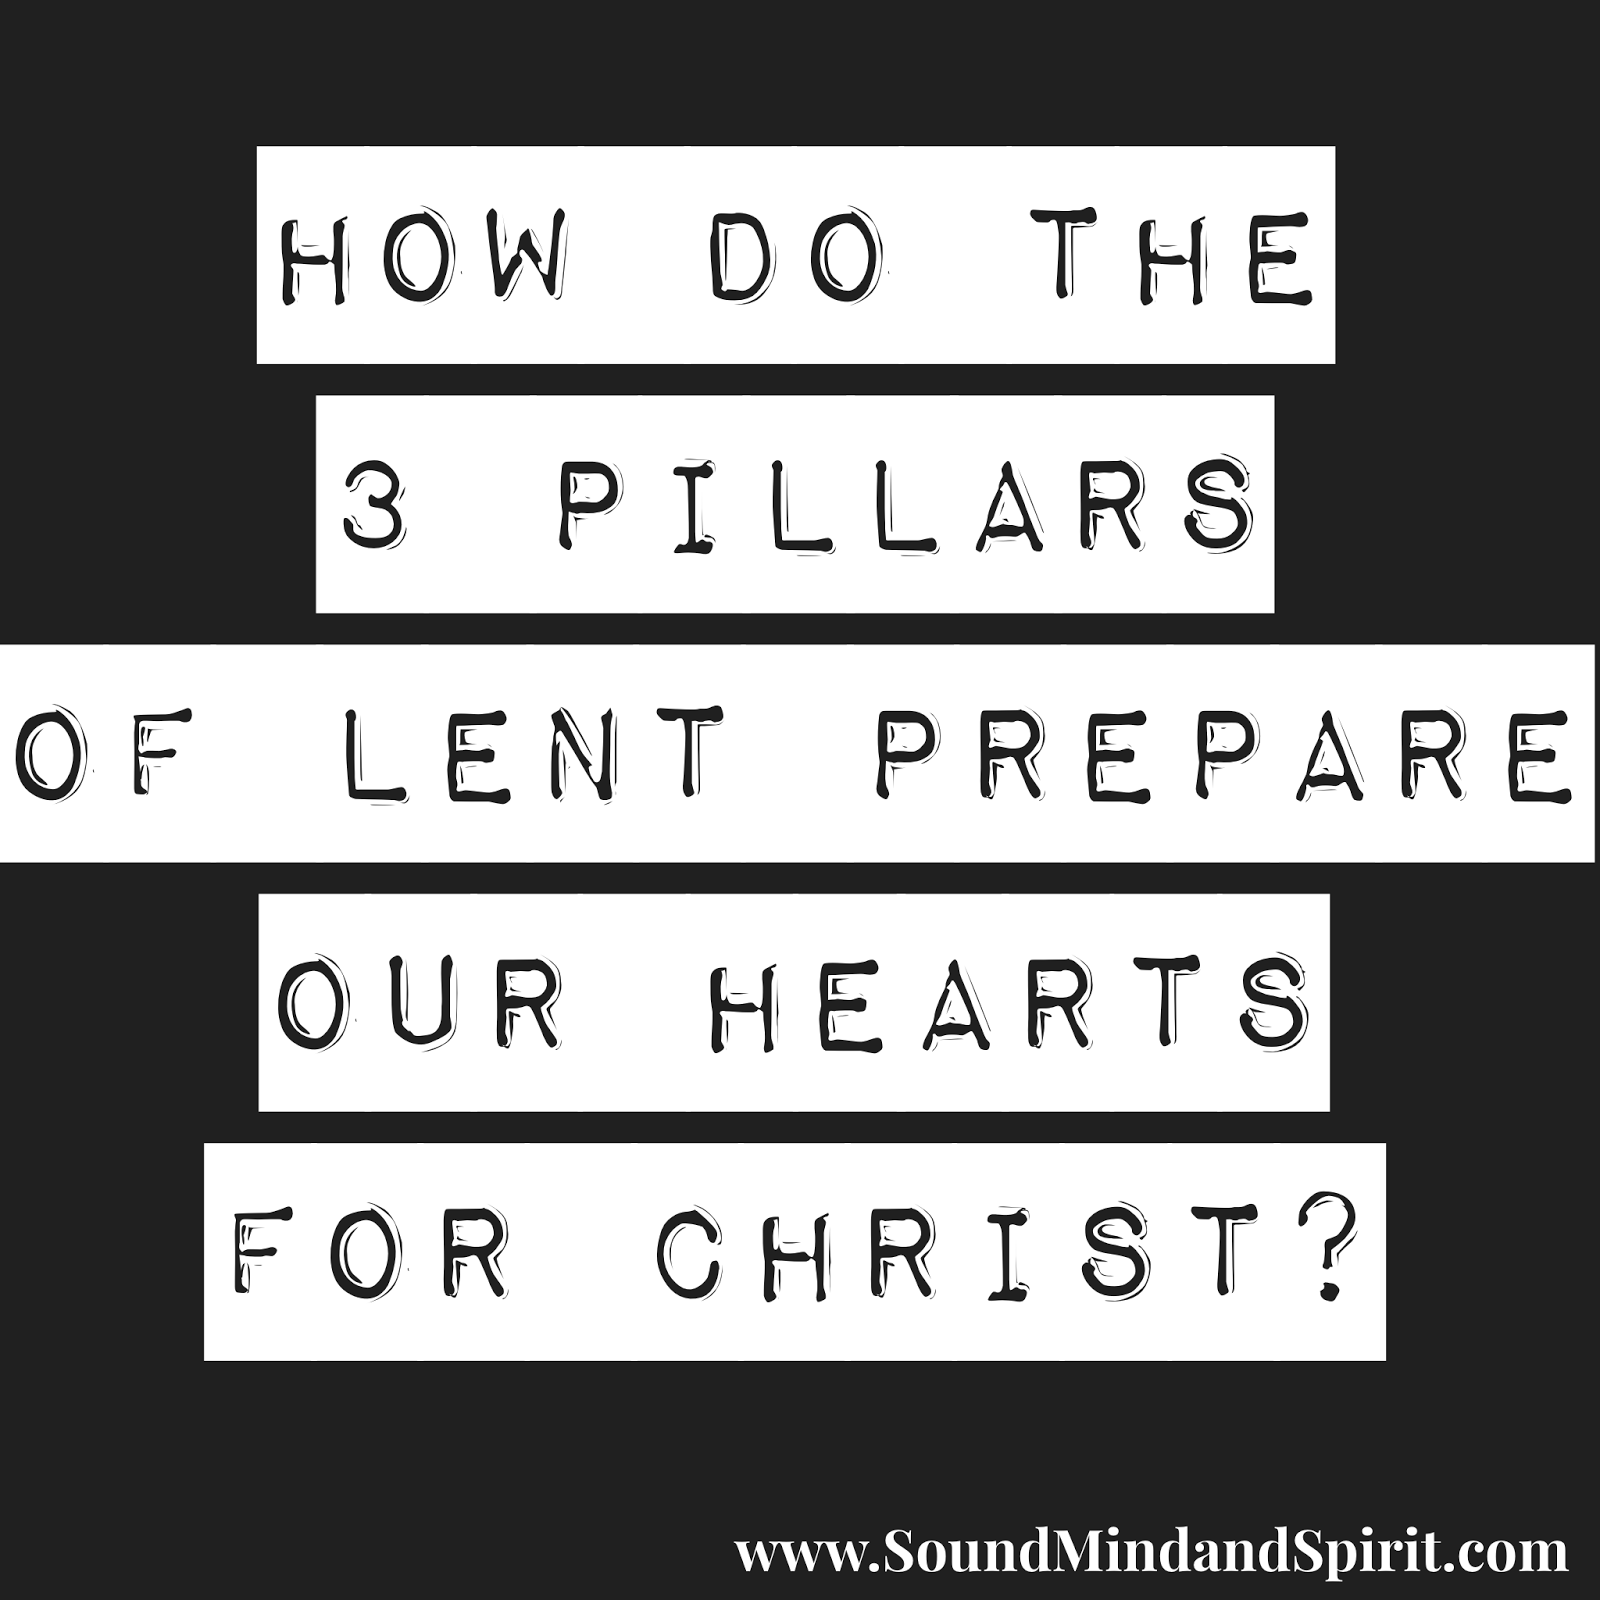 How do the 3 pillars of Lent prepare our hearts for Christ?